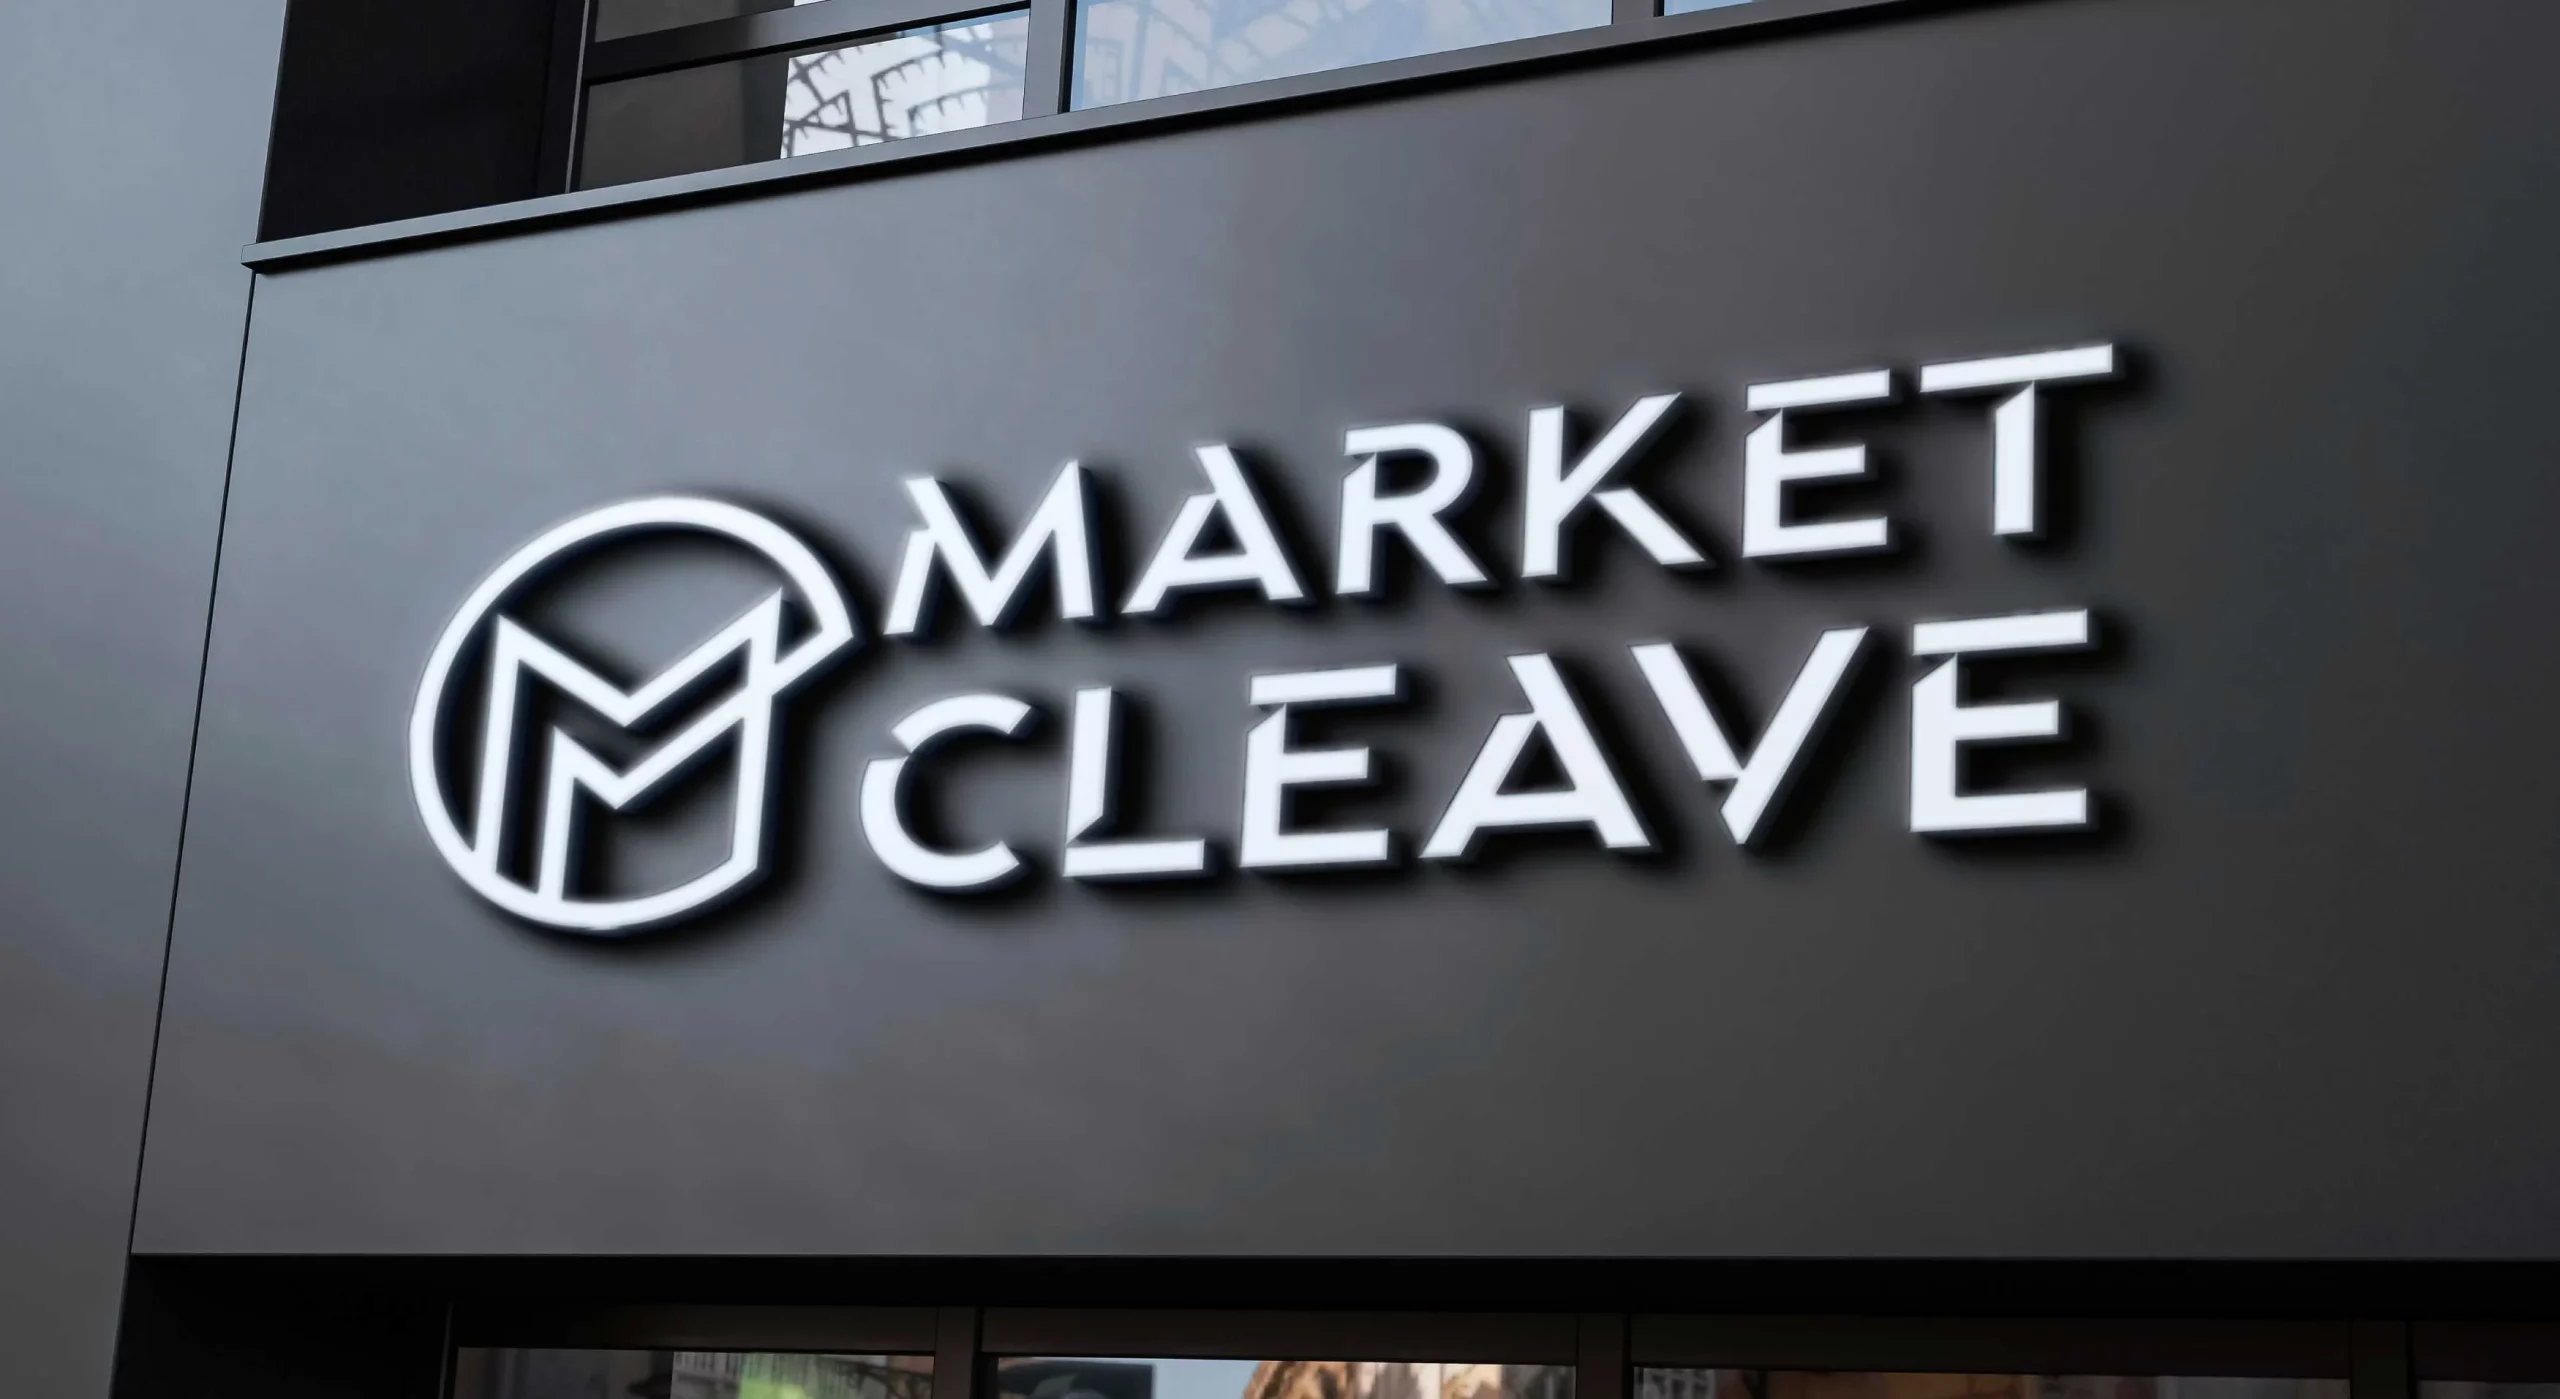 About Market Cleave